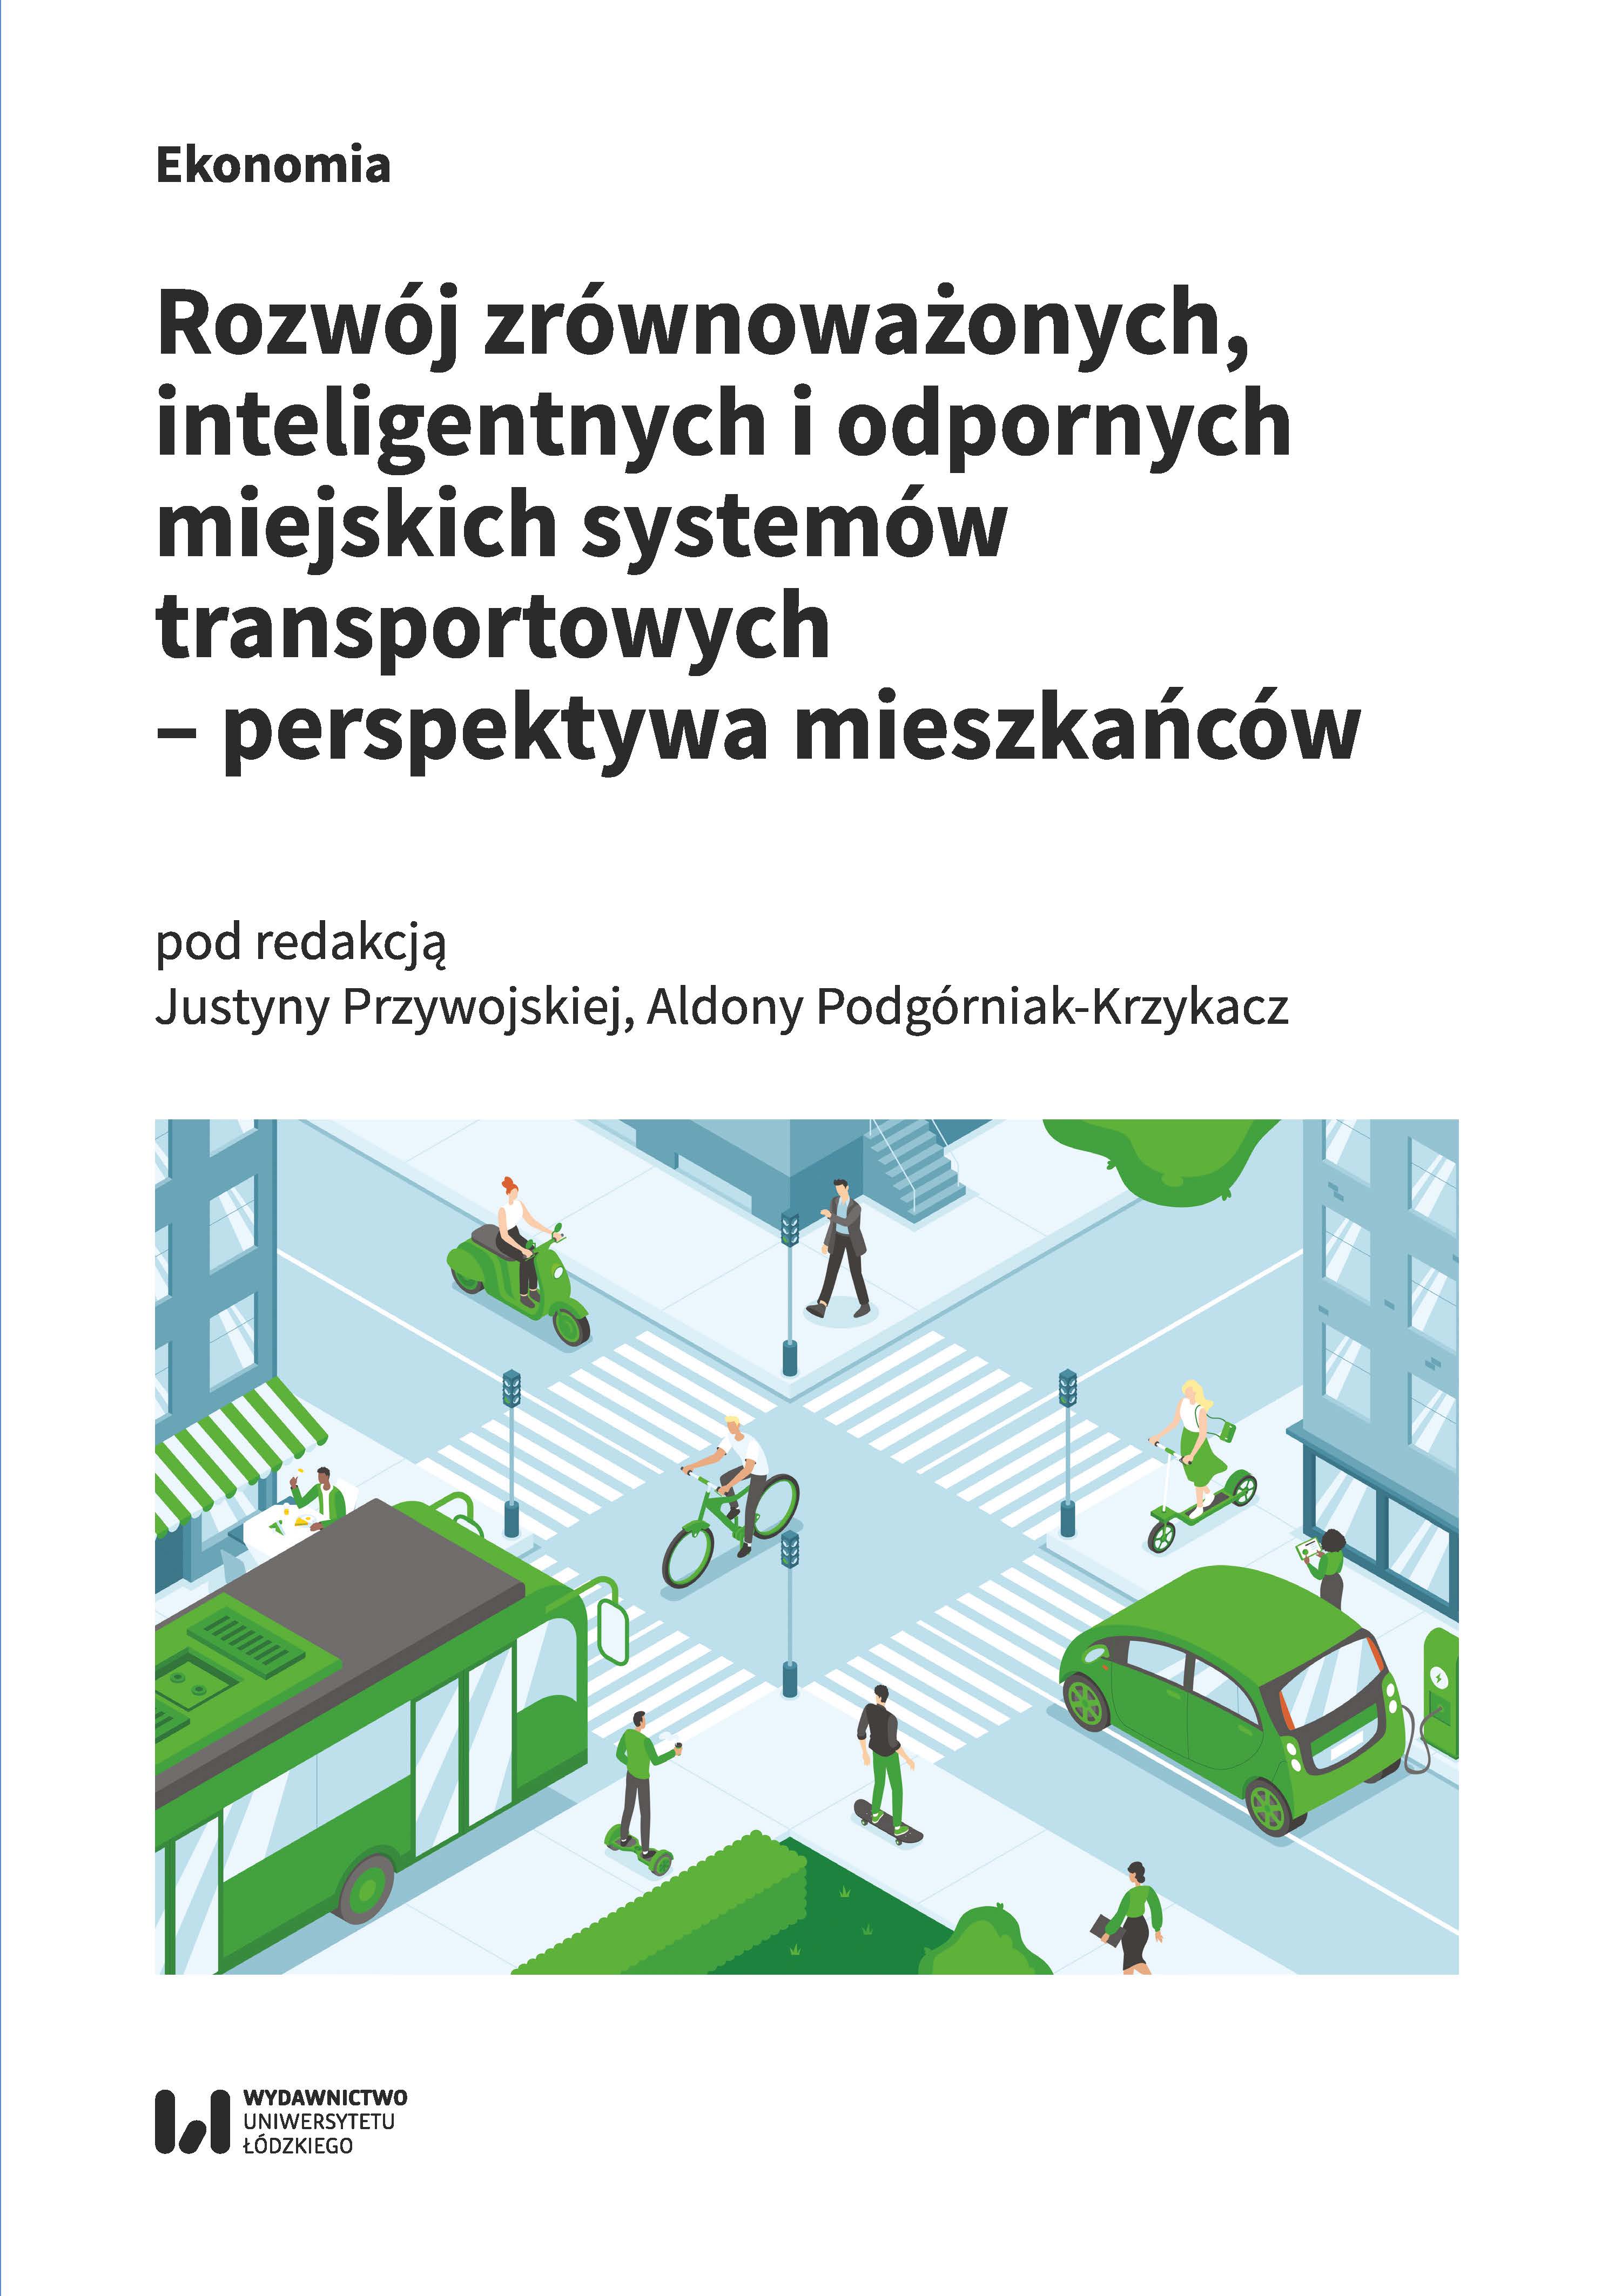 Developing Sustainable, Smart and Resilient Urban Transportation Systems - Residents' Perspective